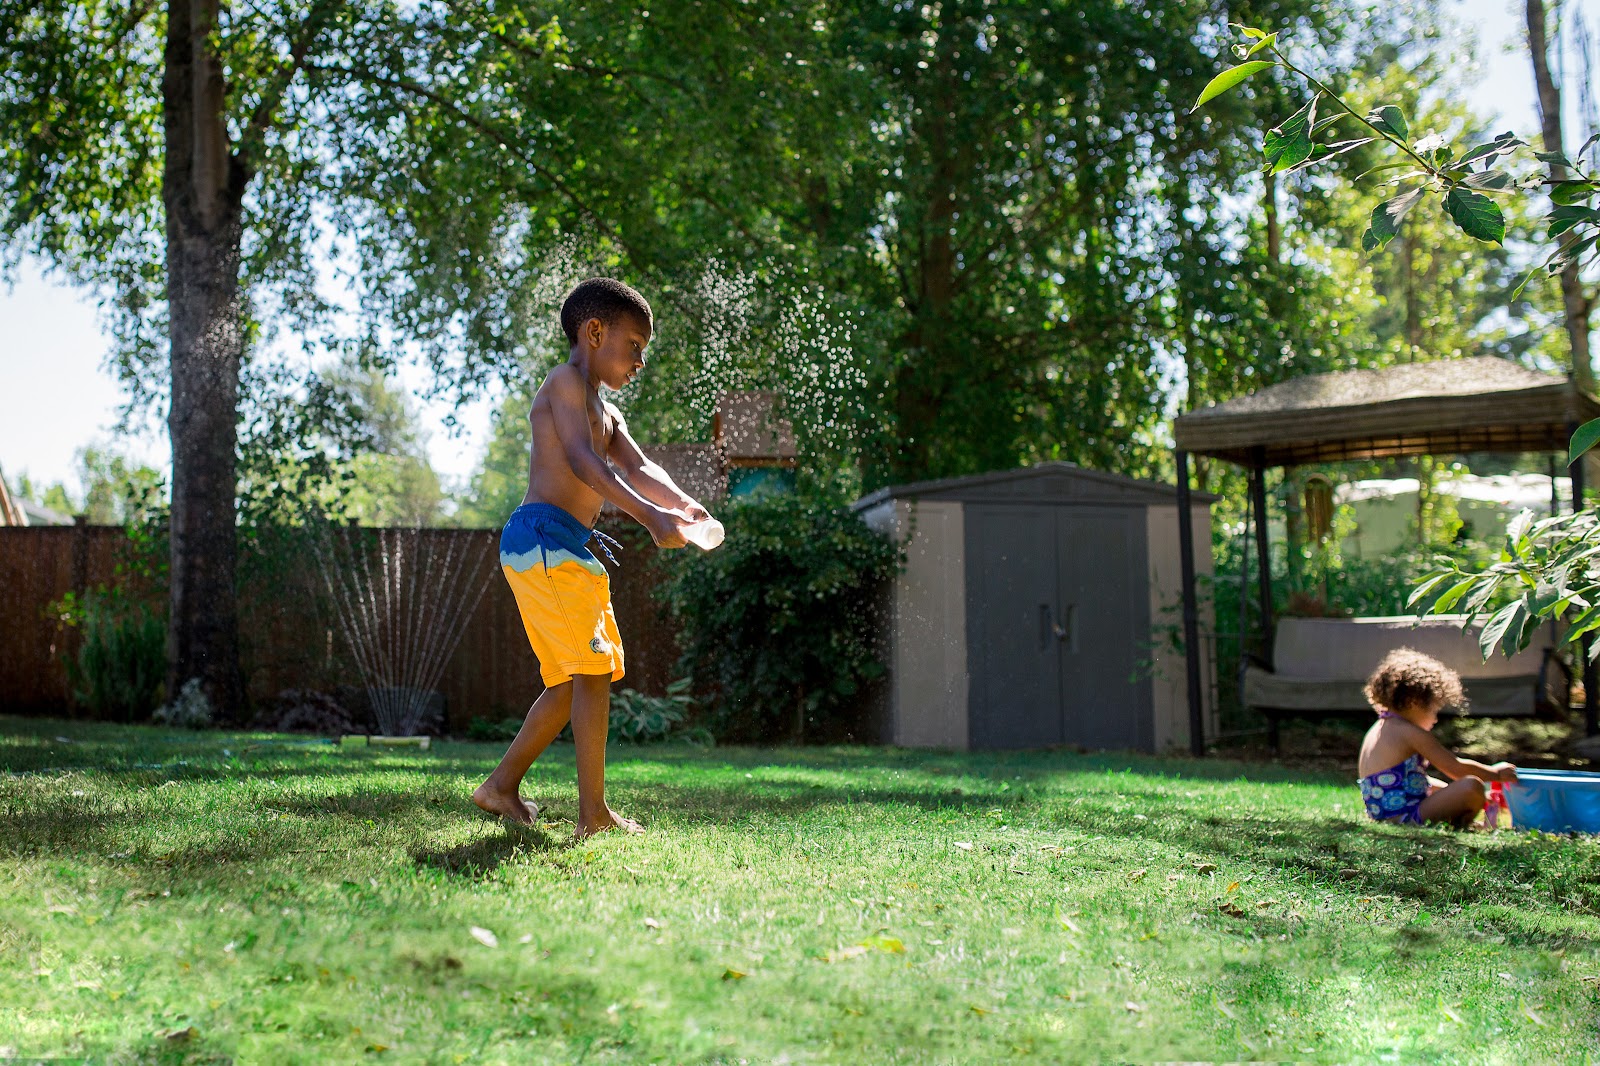 Boy playing in the lawn sprinkler at home